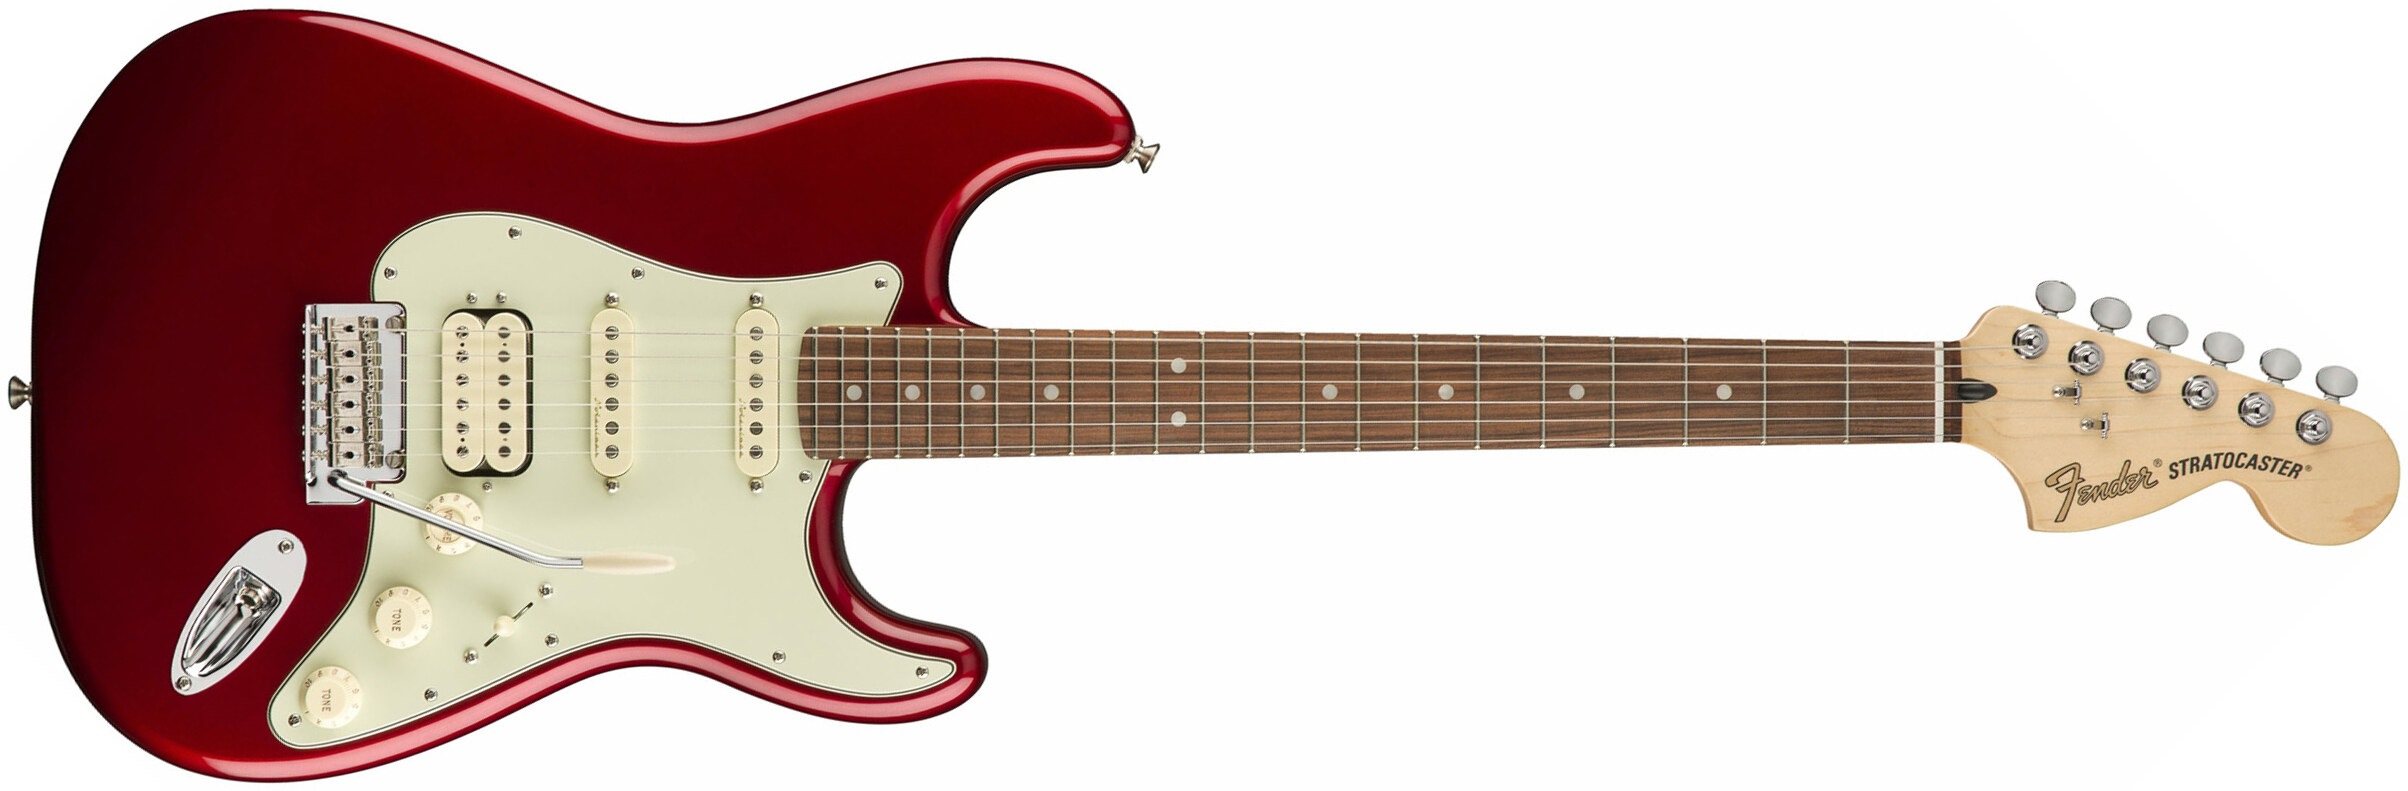 Fender Strat Deluxe Hss Mex Pf 2017 - Candy Apple Red - Guitare Électrique Forme Str - Main picture